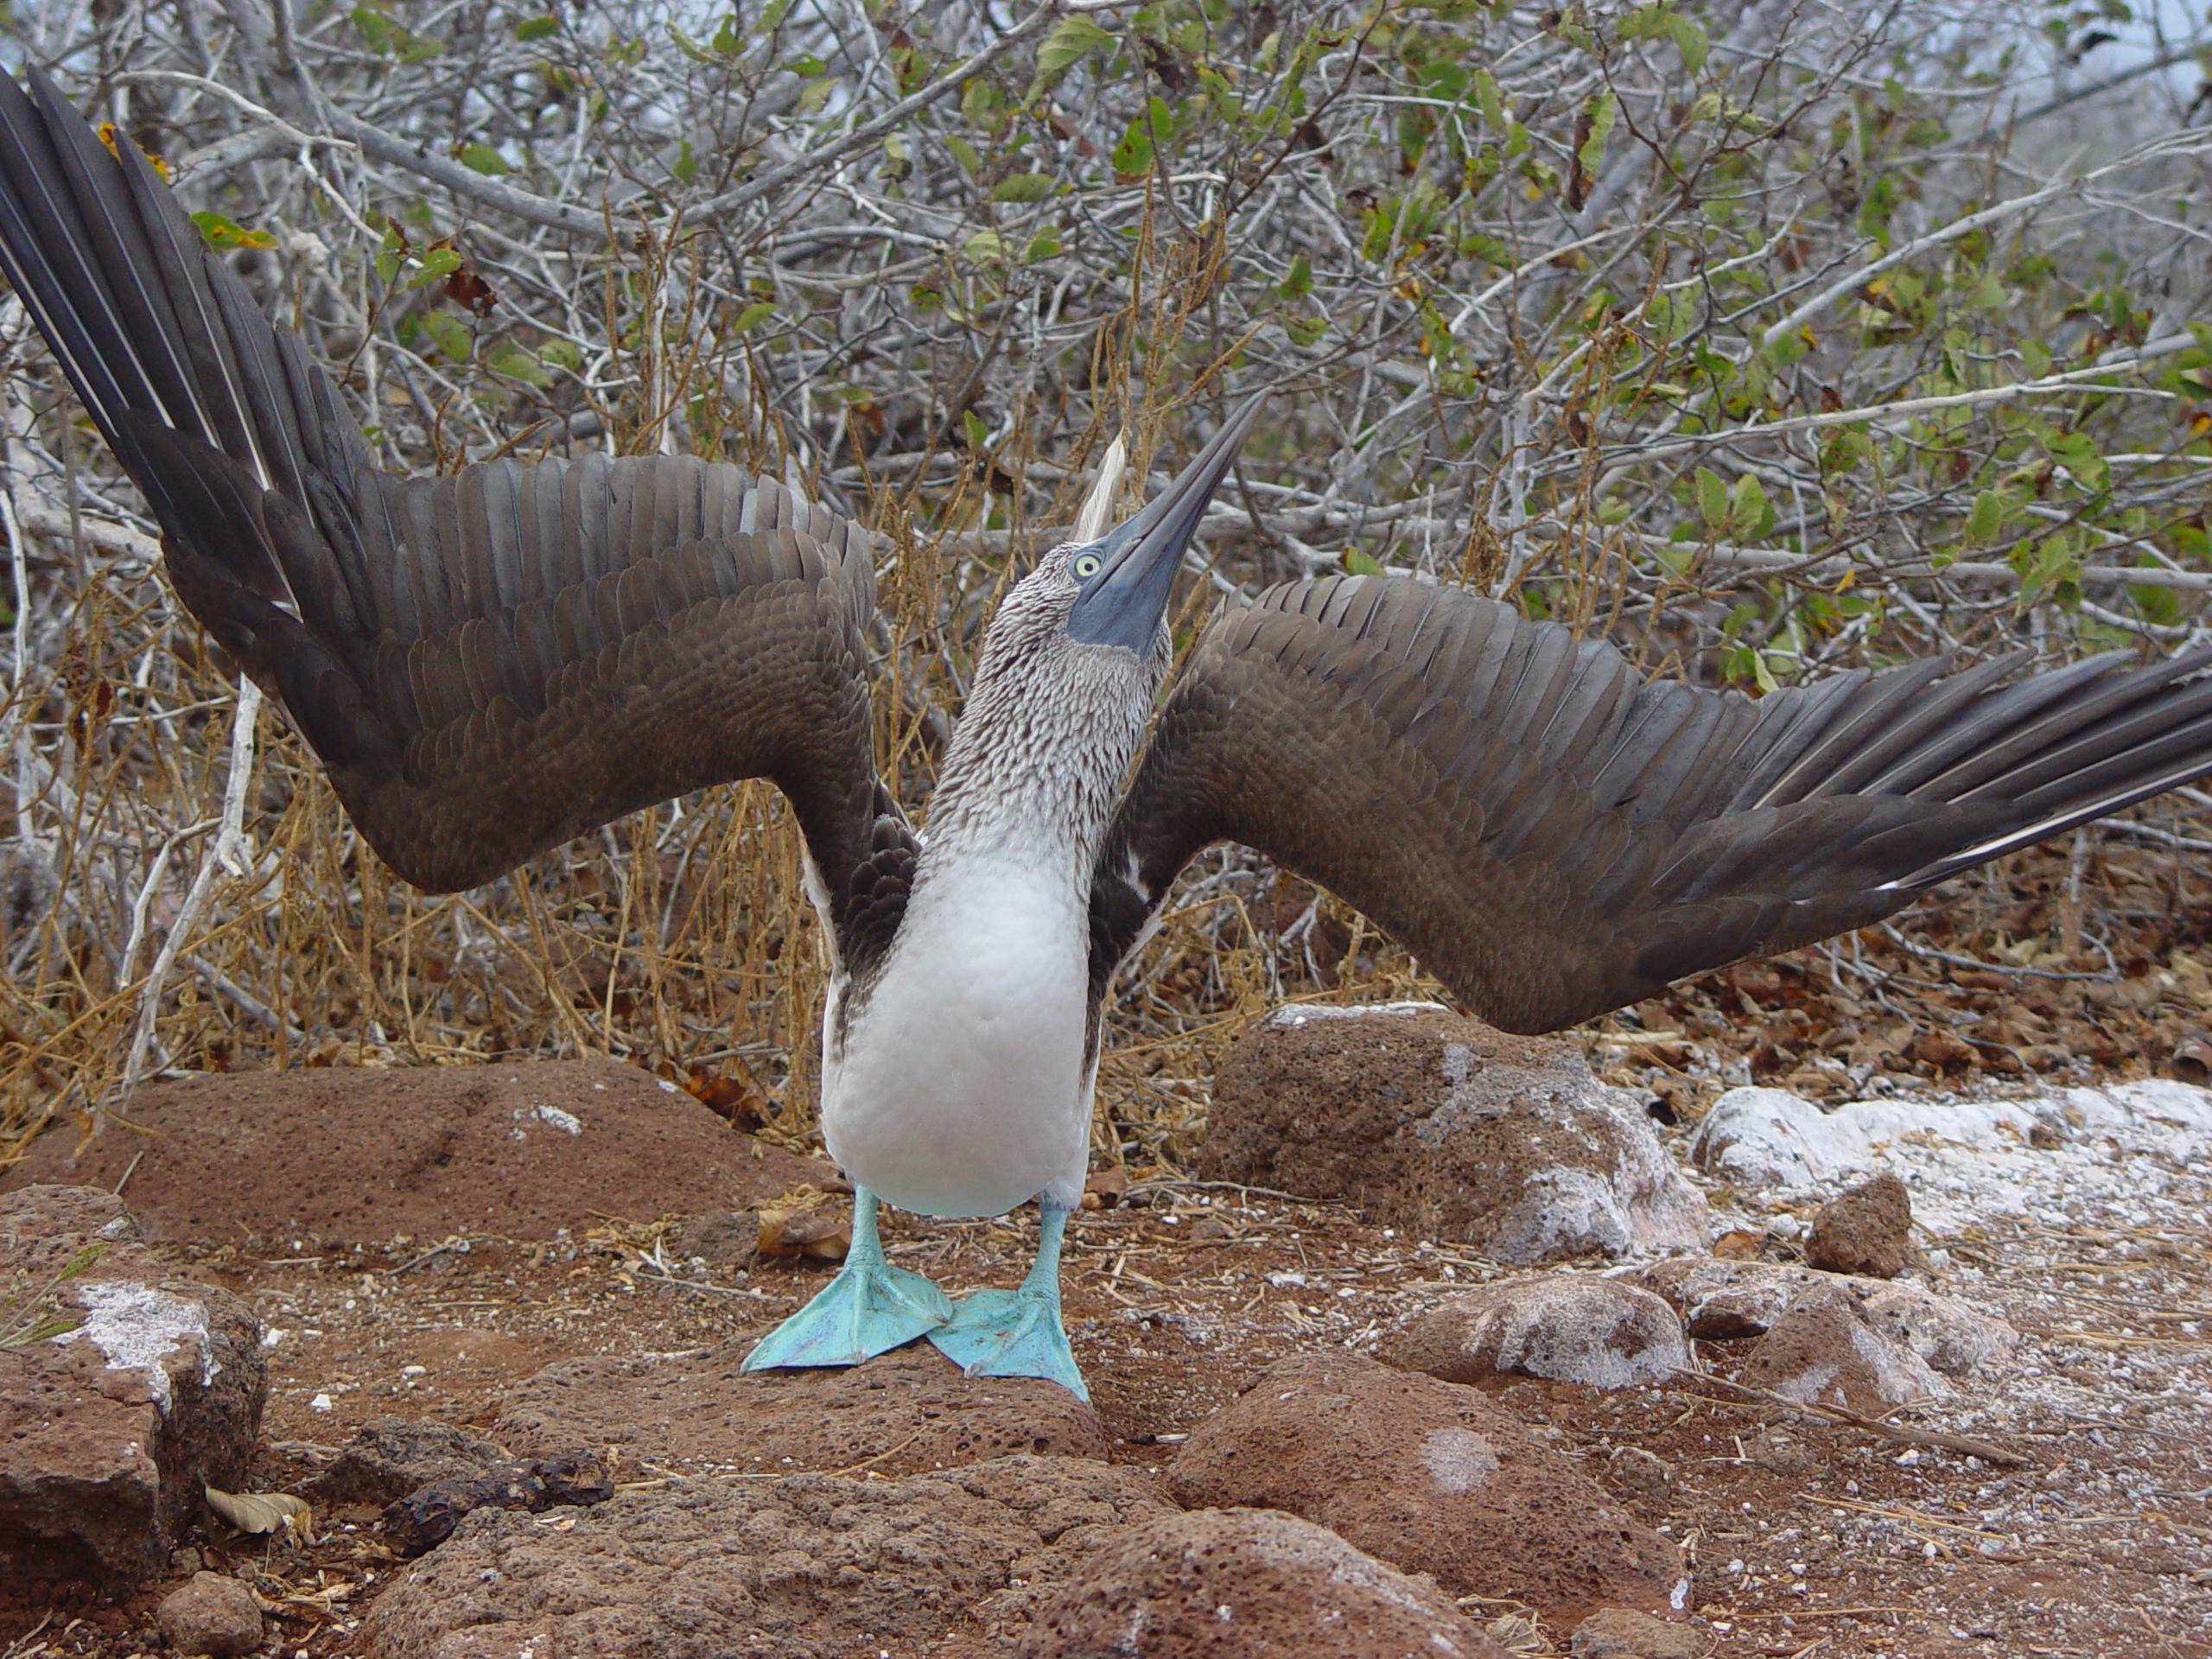 Blue-footed_Booby_(Sula_nebouxii)_-displaying.jpg